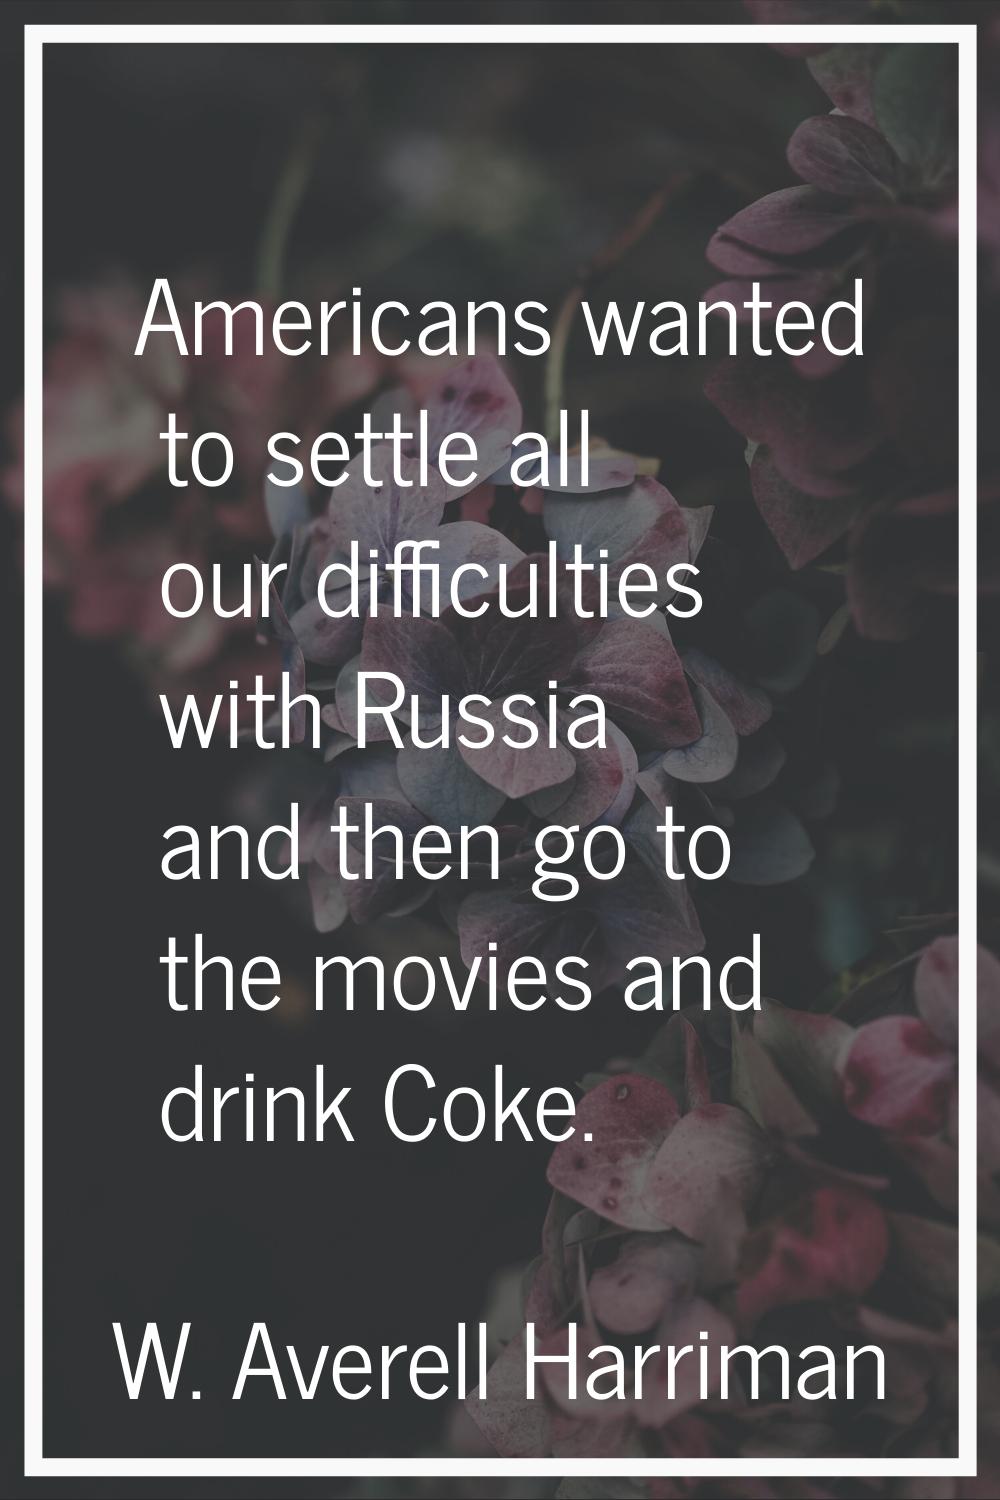 Americans wanted to settle all our difficulties with Russia and then go to the movies and drink Cok